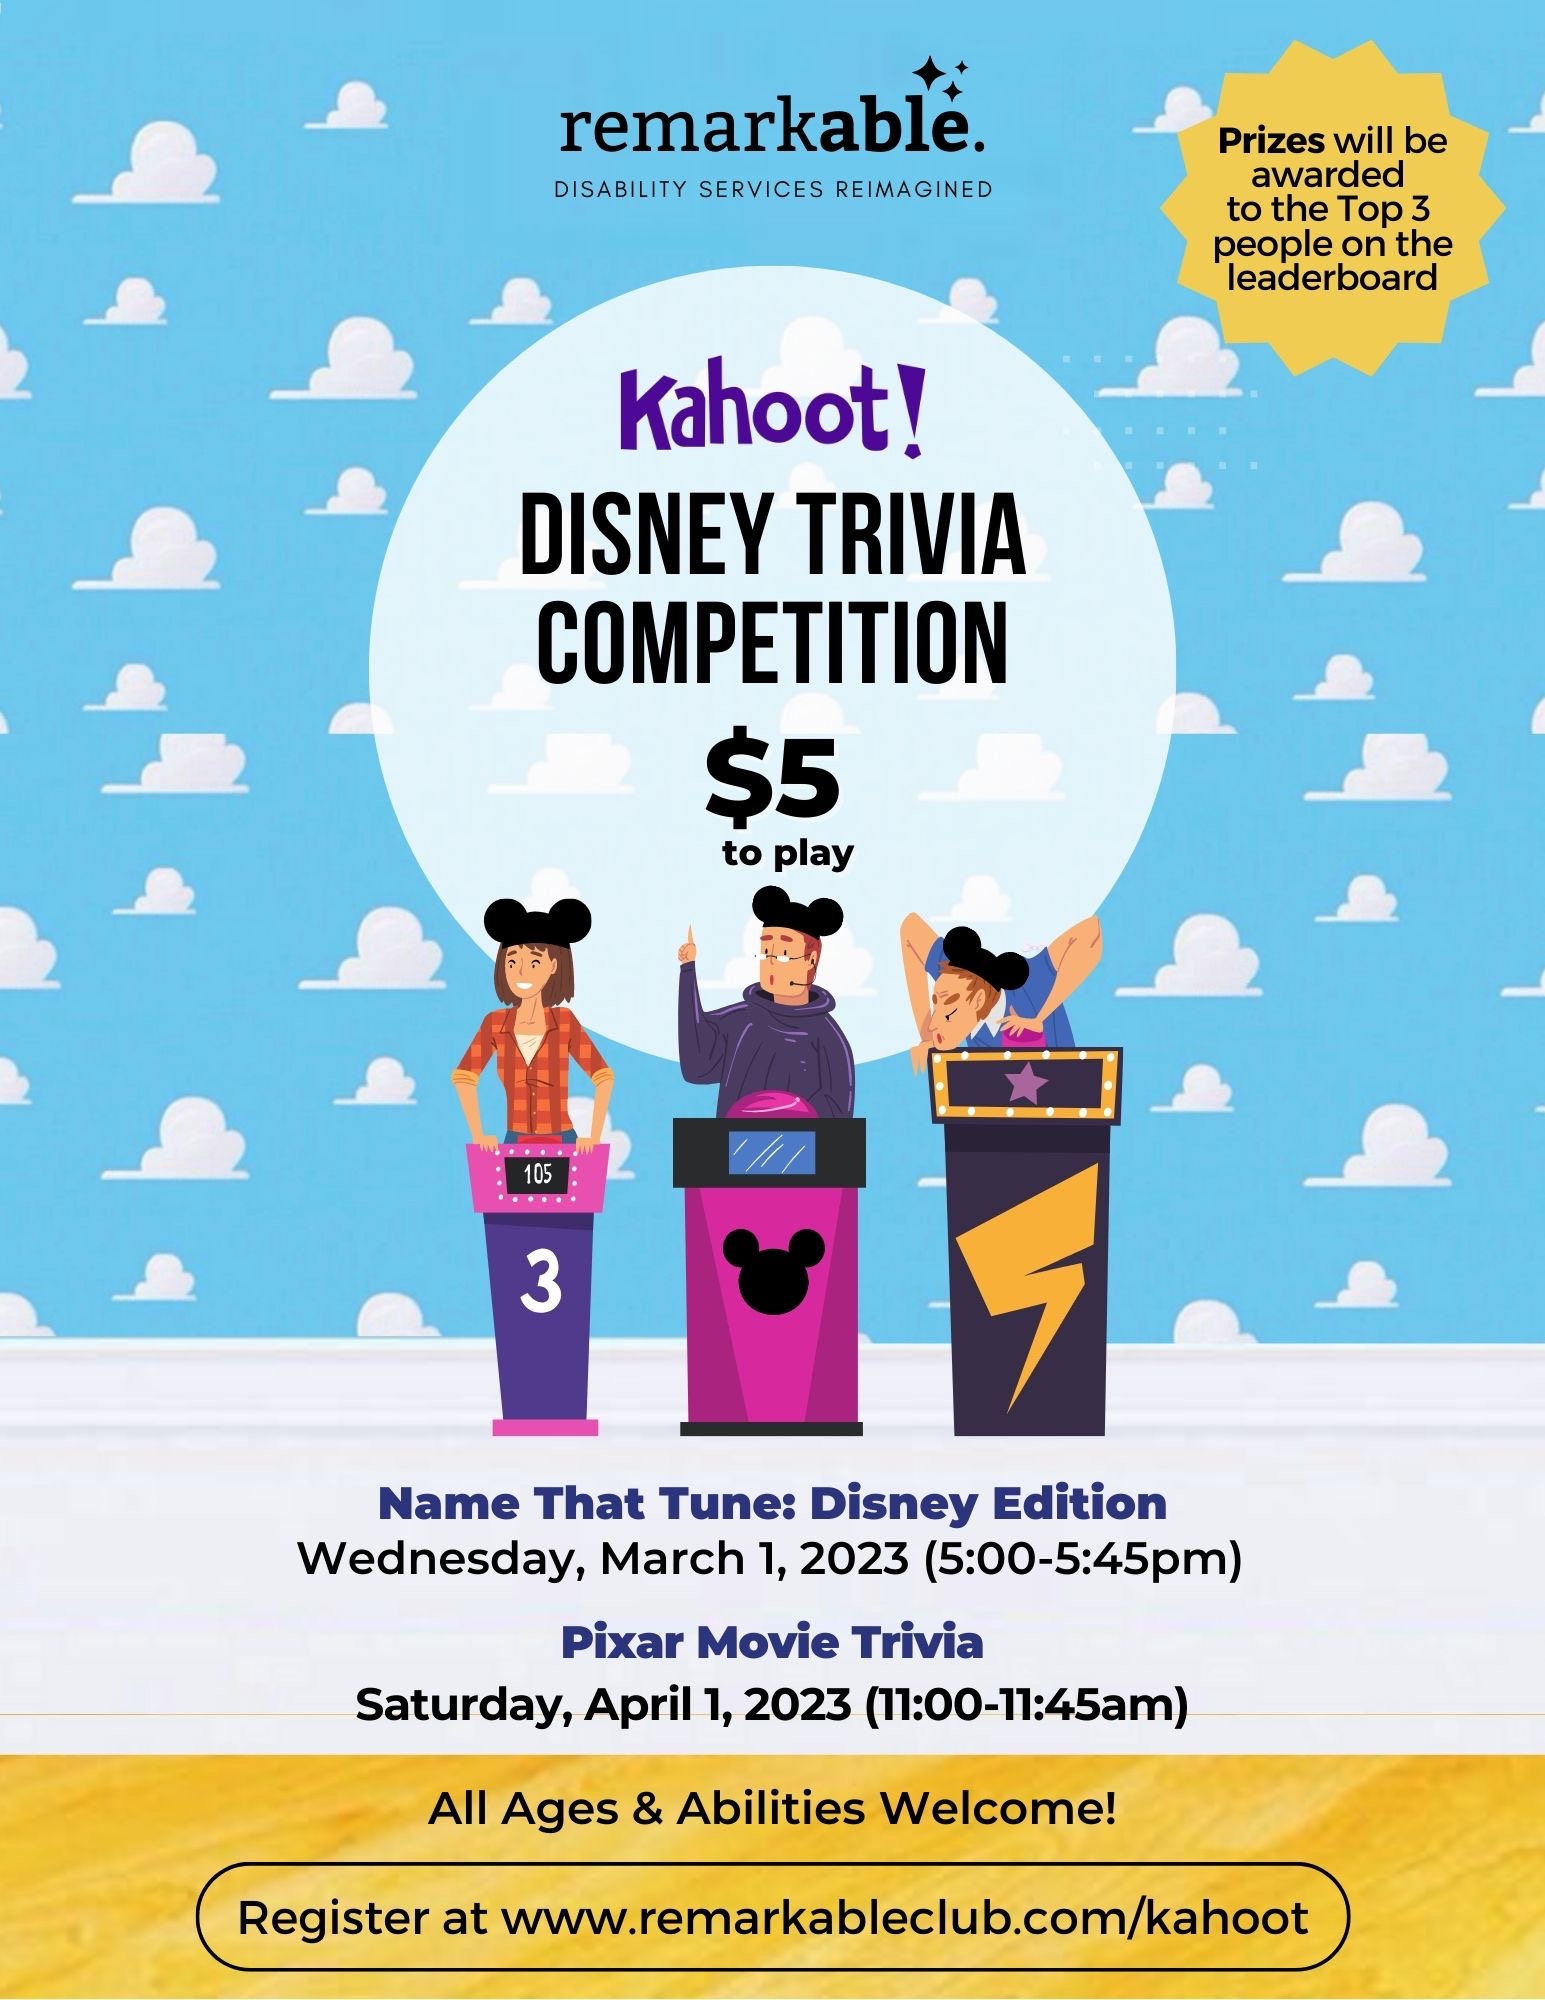 A flyer showcasing the exciting new Disney trivia competition.